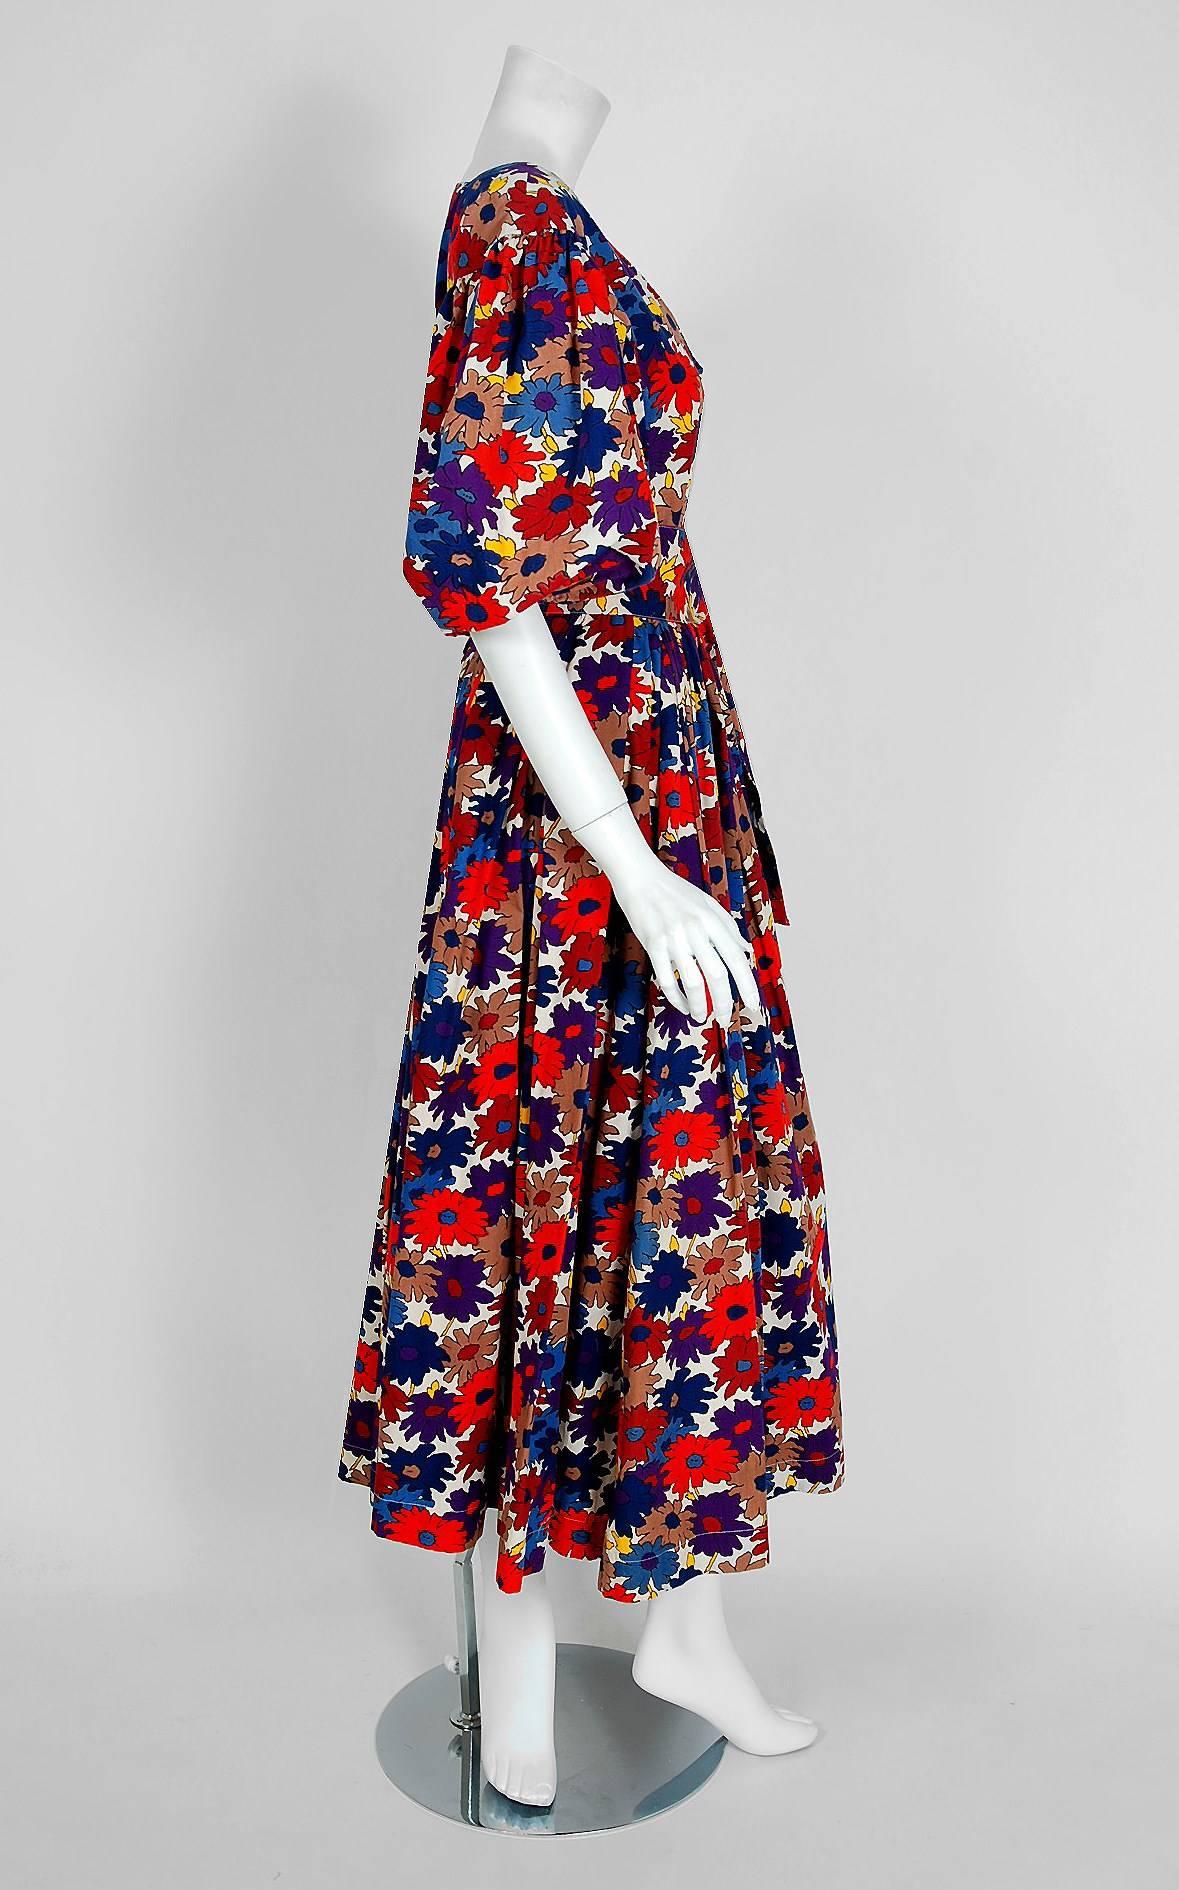 Breathtaking Yves Saint Laurent colorful floral garden print cotton ensemble from the infamous Rive Gauche collection during the mid-1970's. Pieces from this decade are very rare and are true examples of fashion history. I adore the low plunge